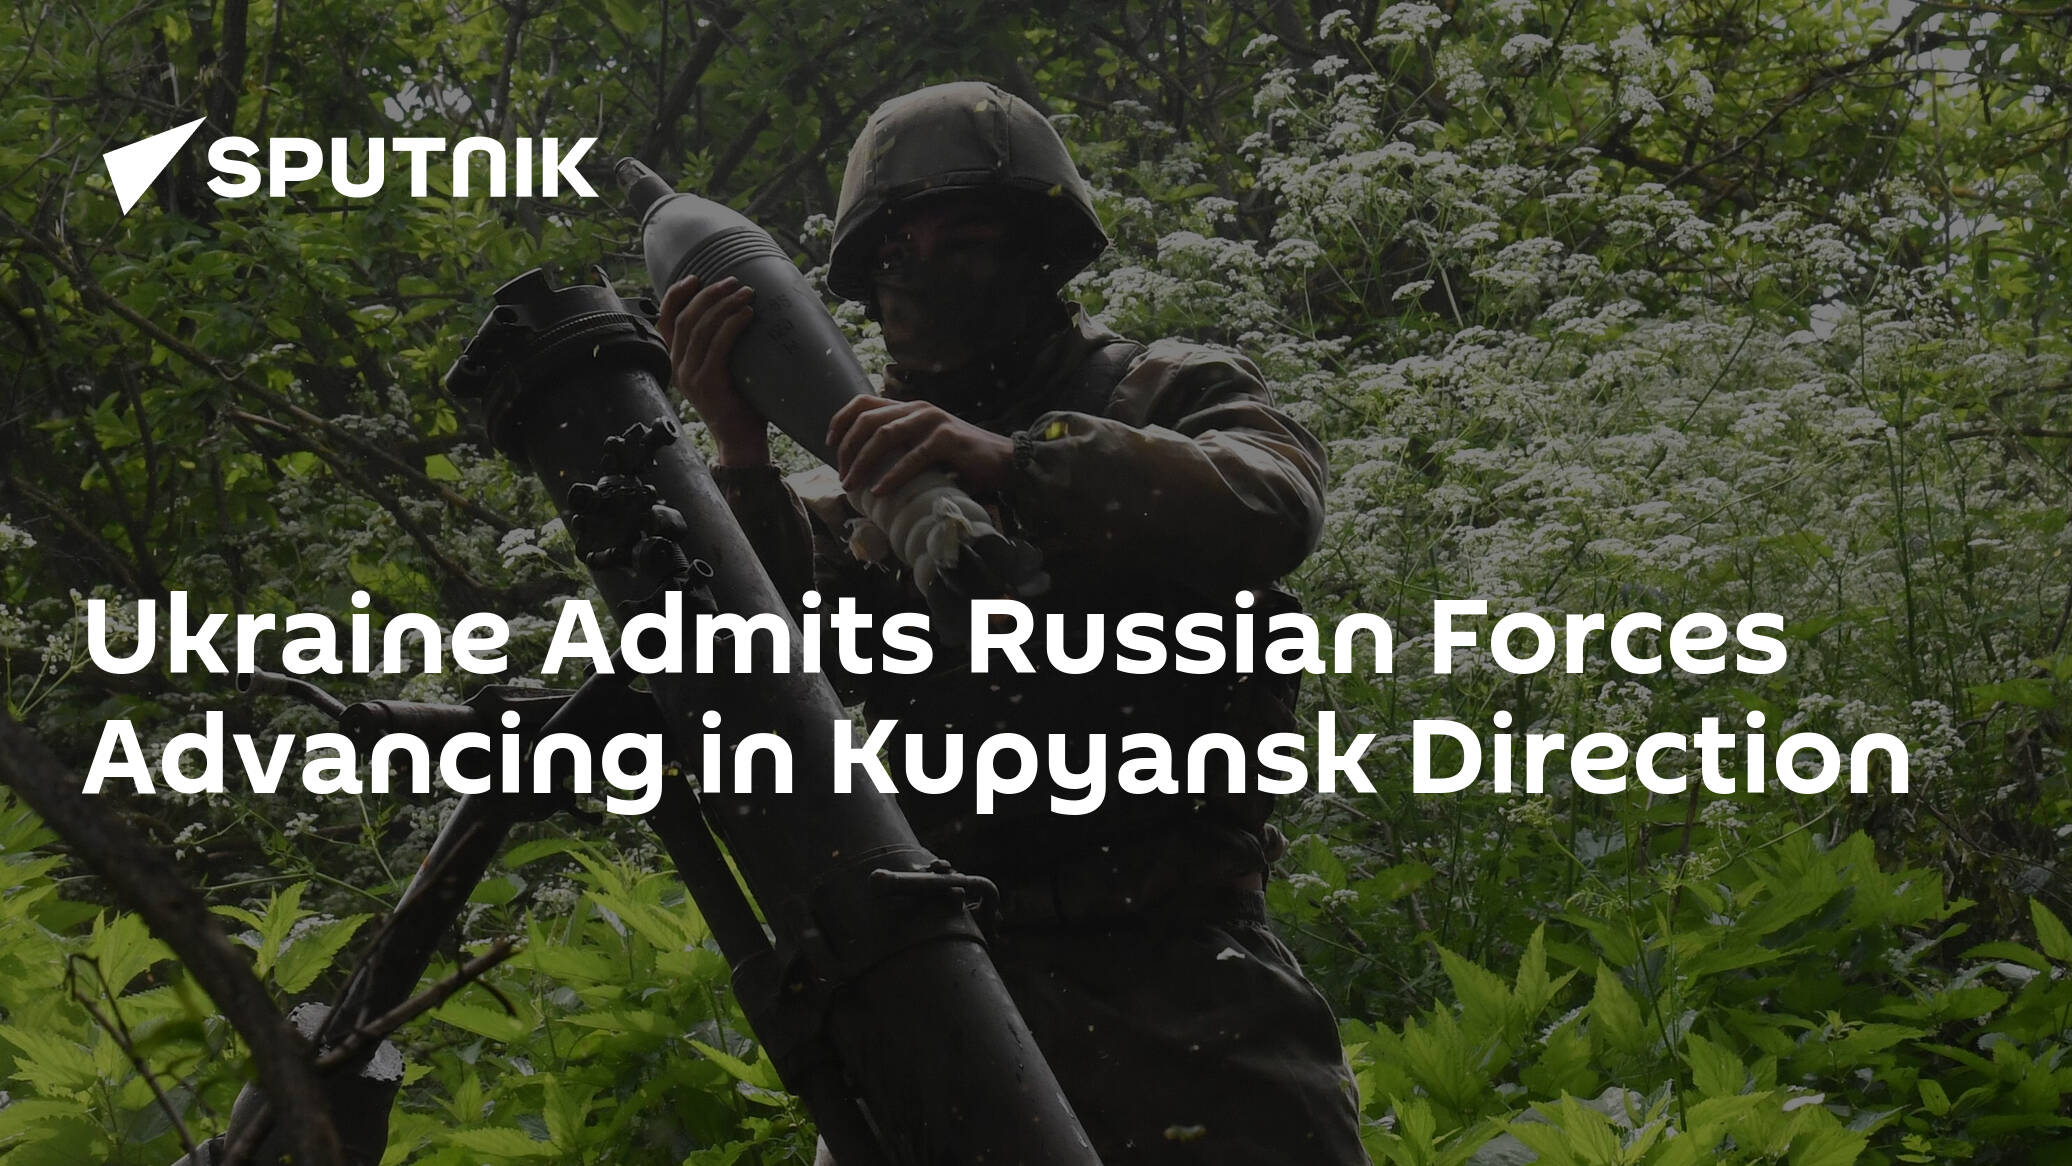 Ukraine Admits Russian Forces Advancing in Kupyansk Direction